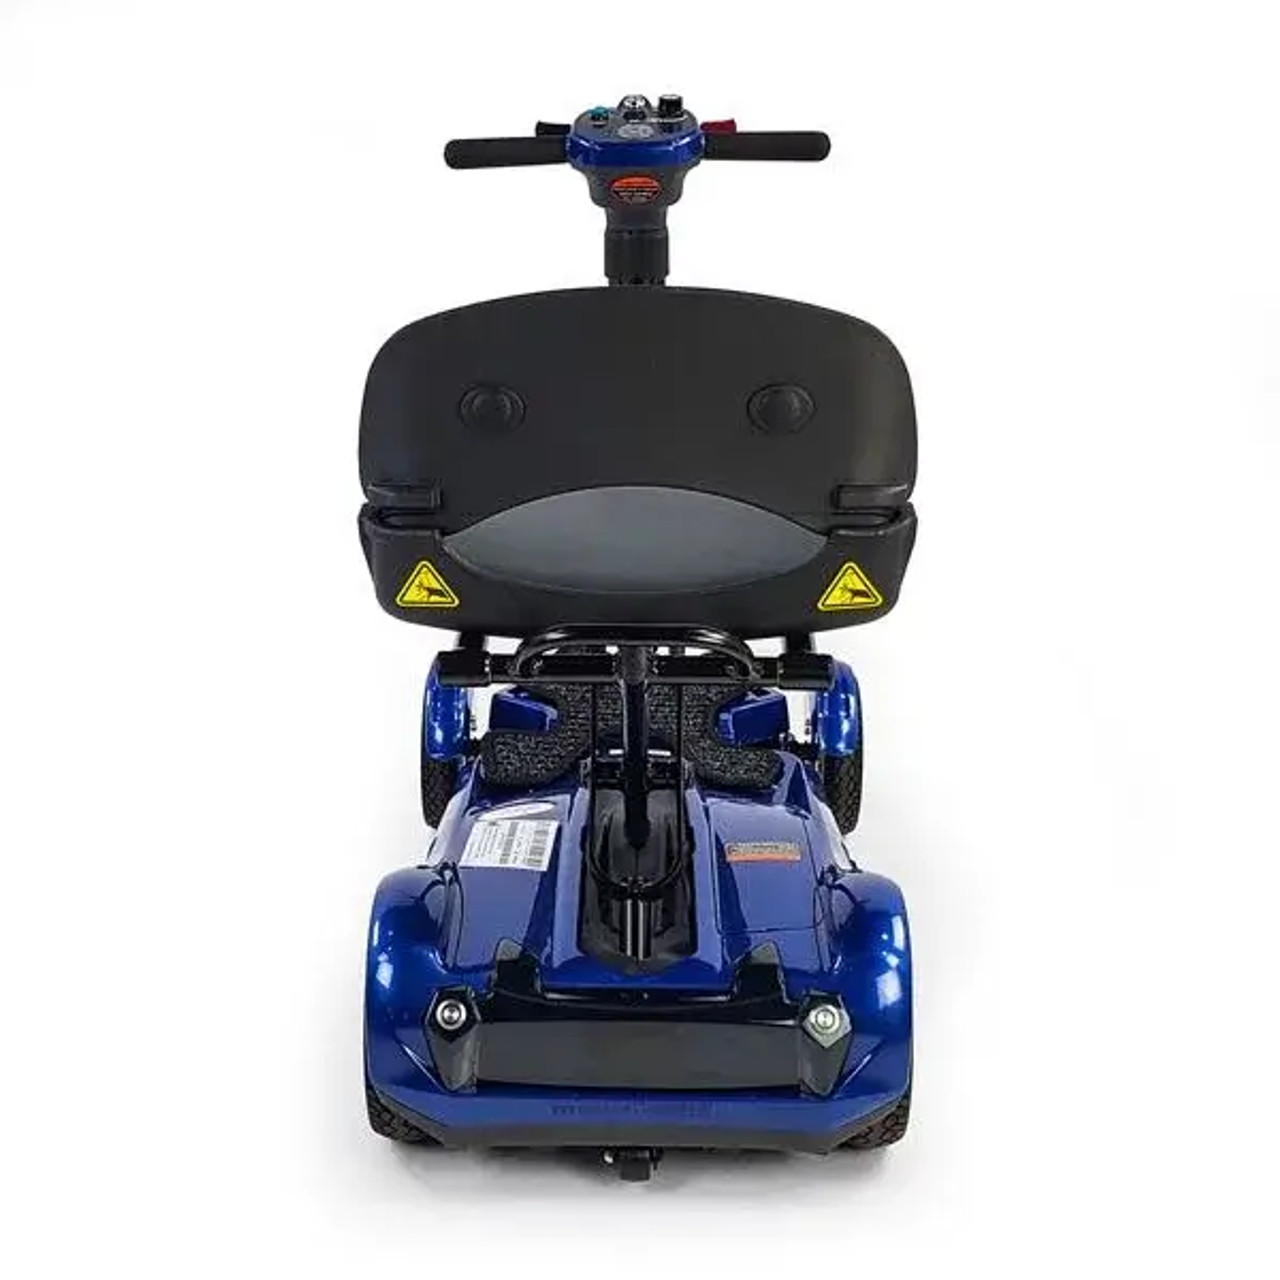 TranSport Top-Tier Comfort 4AF Folding Power Scooter by EV Rider-Chicken Pieces